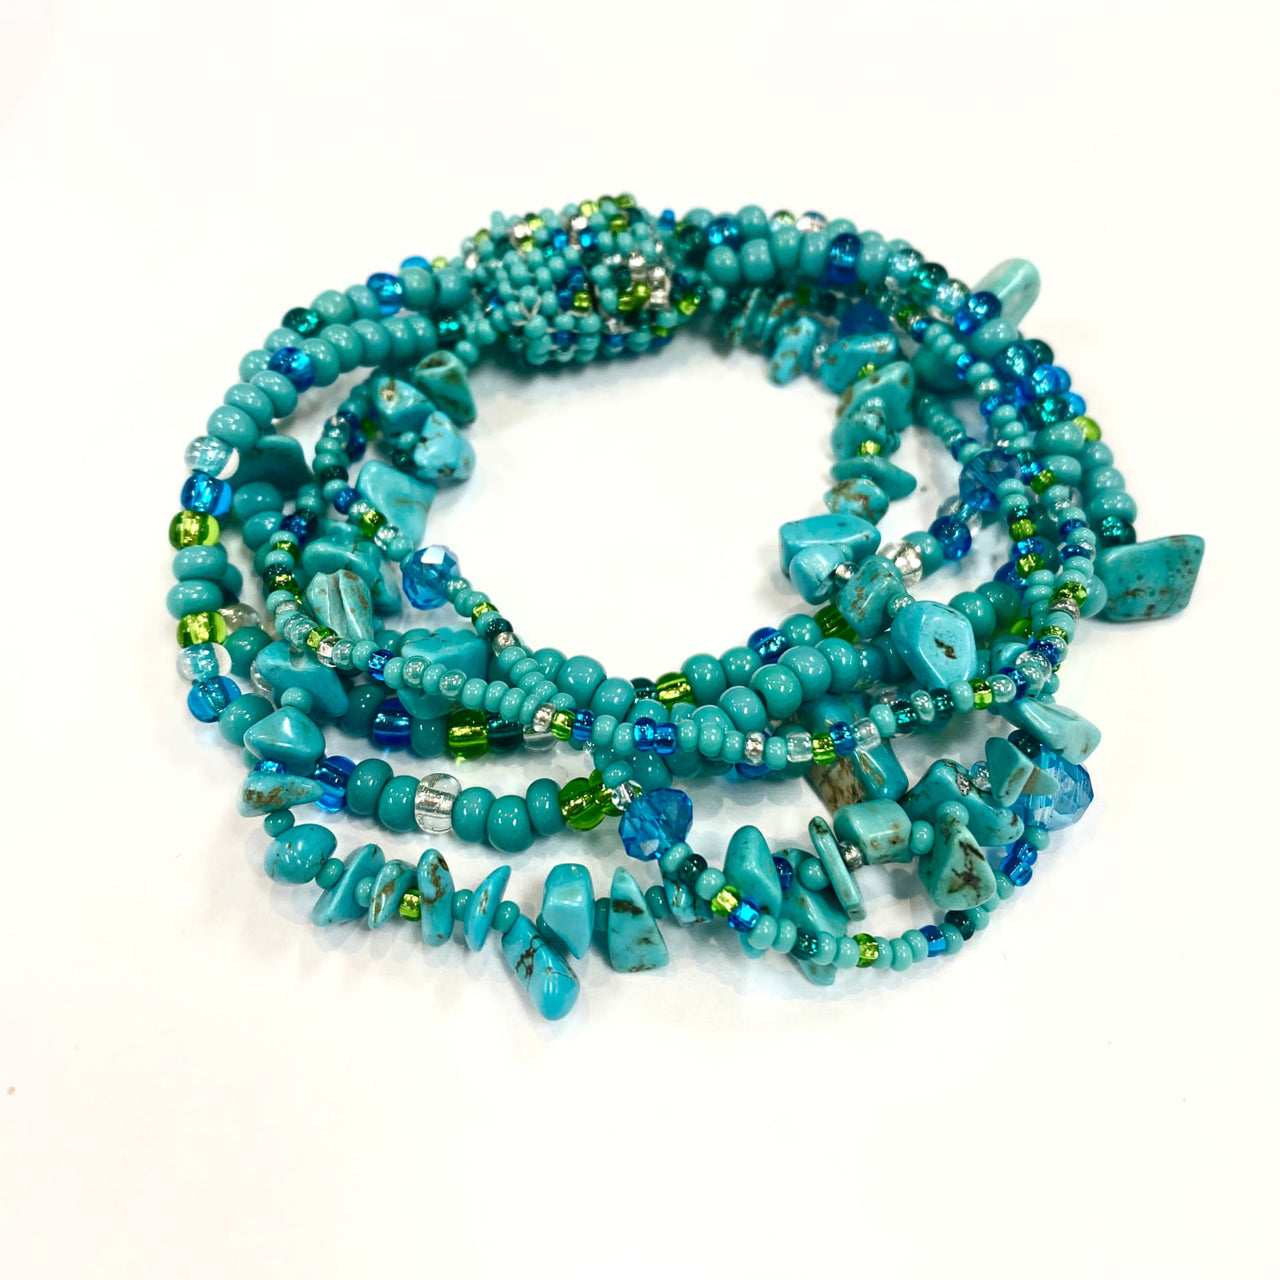 Crystal Beaded 6 Strand Bracelet with green aventurine and blue beads, Magnet Clasp #LV1779